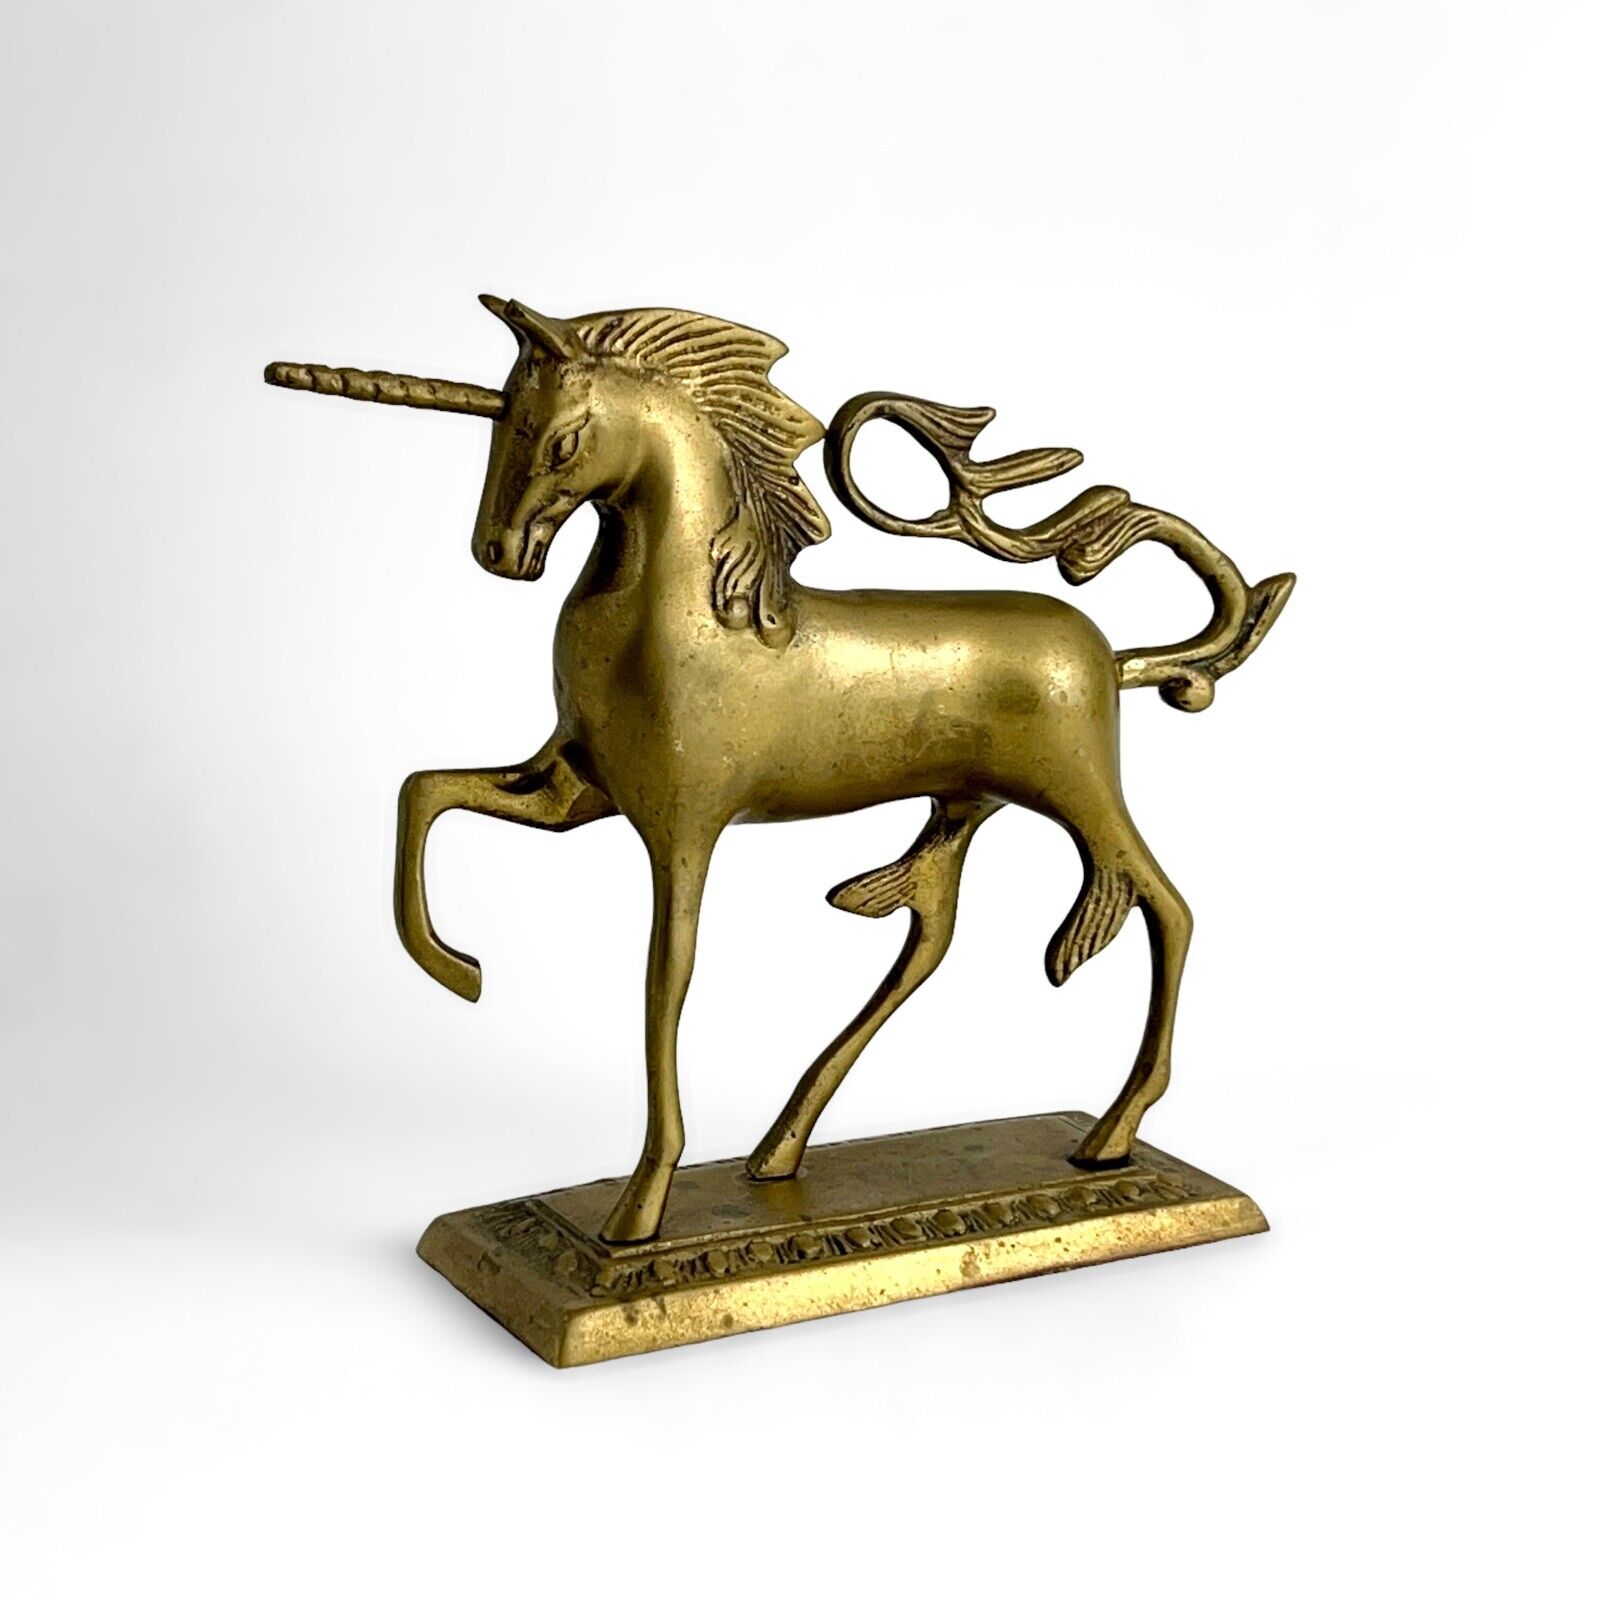 Vintage Solid Brass Prancing UNICORN Figure Mythical Sculpture 9x7 Paperweight